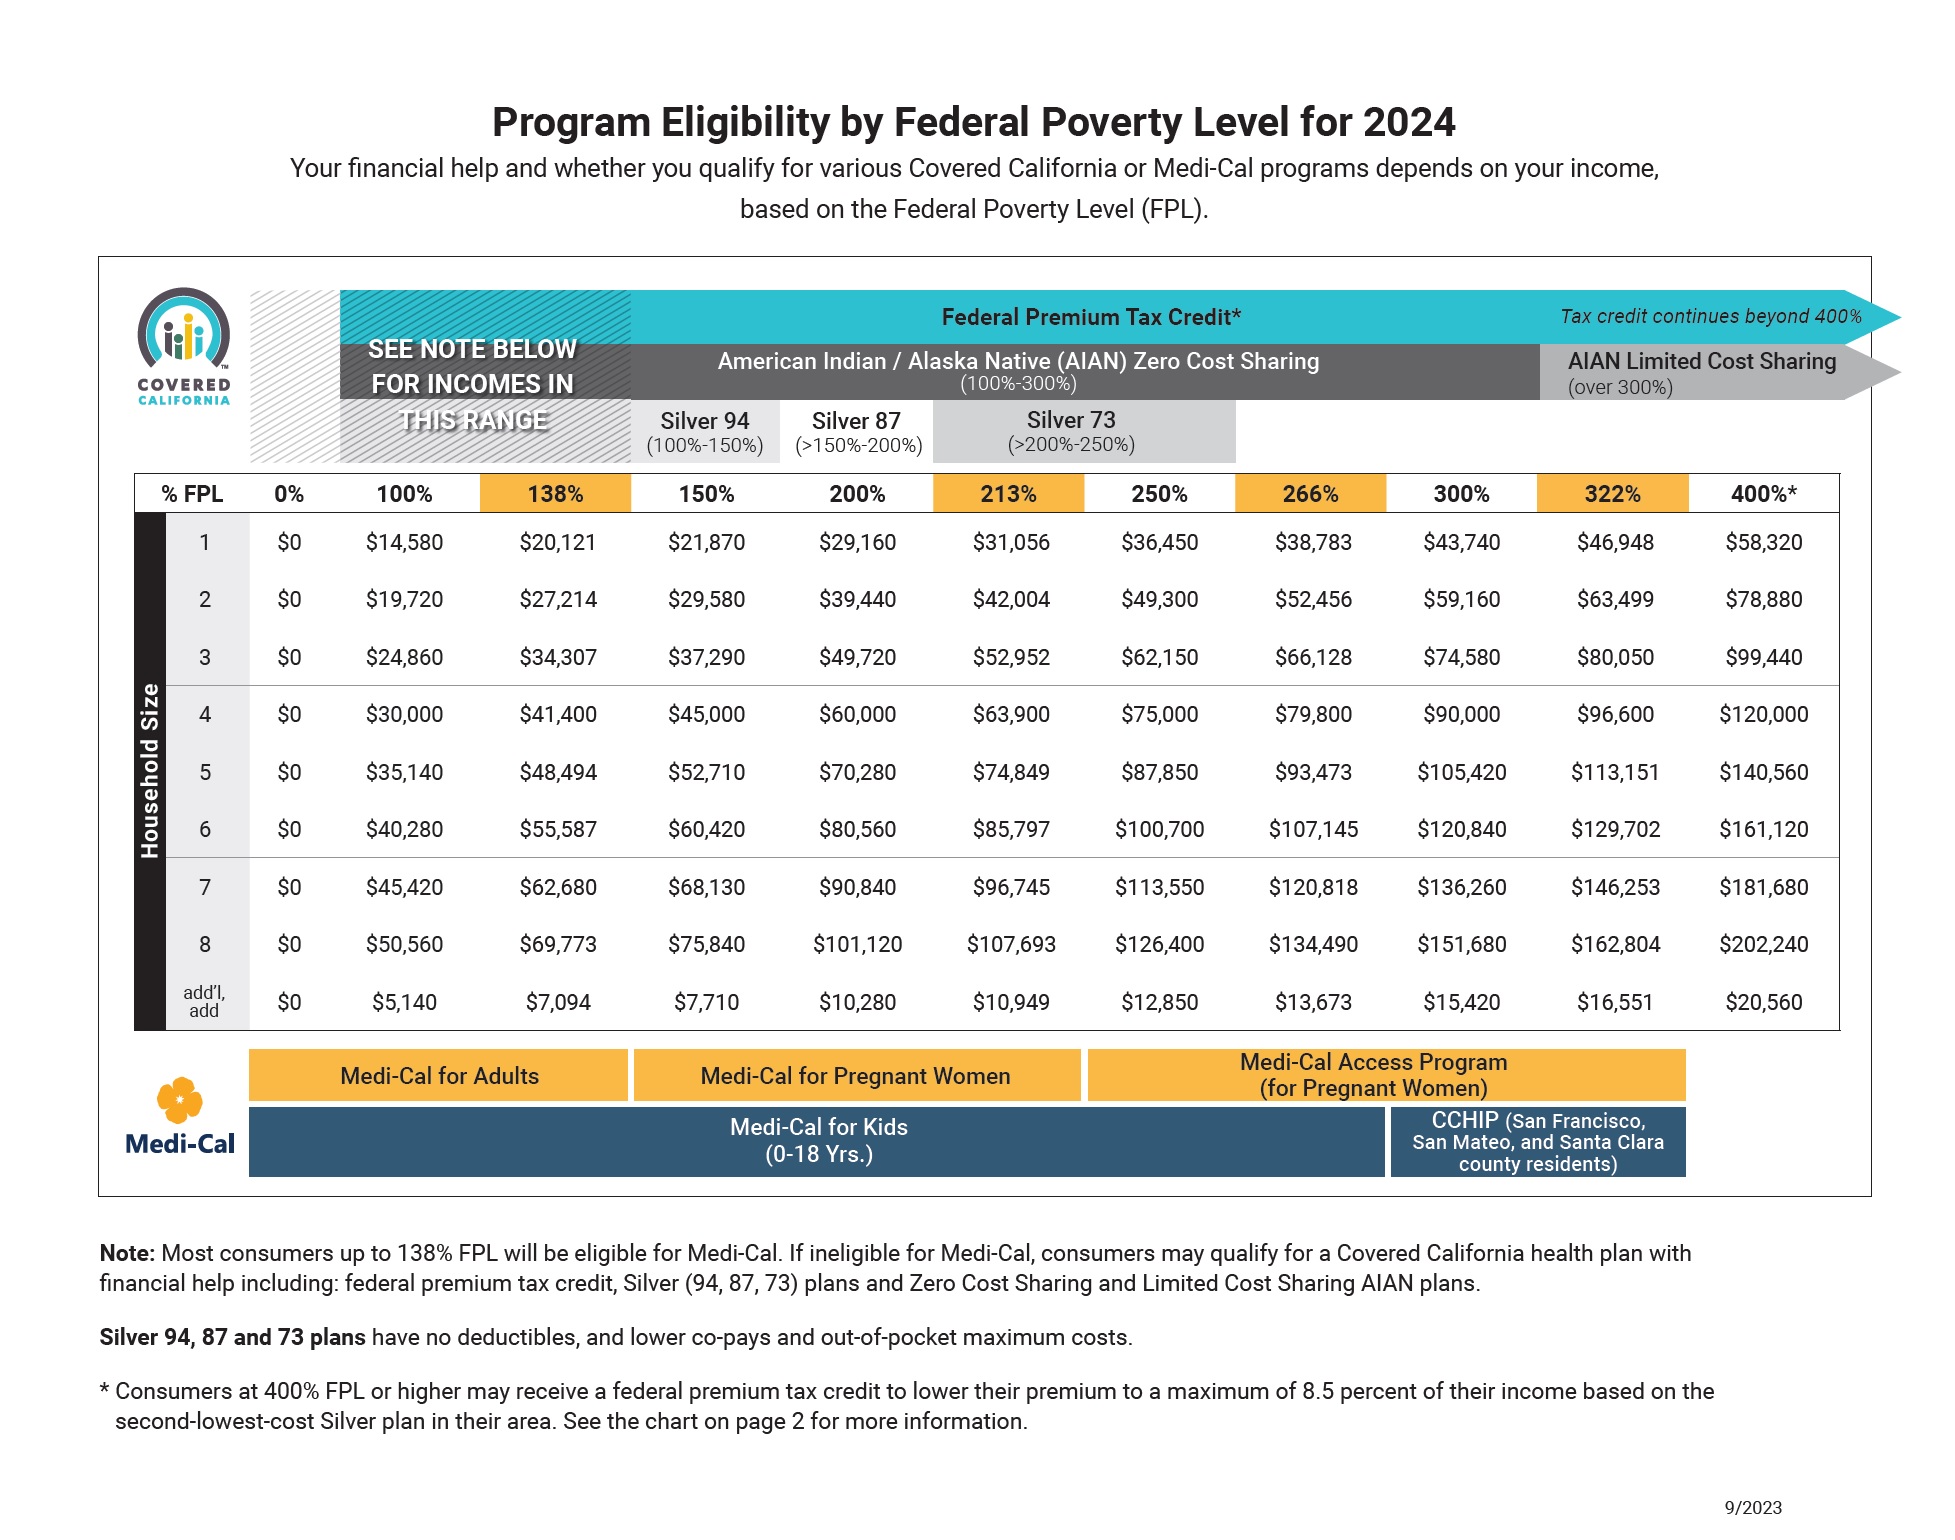 what is the federal poverty level (FPL) for 2024?